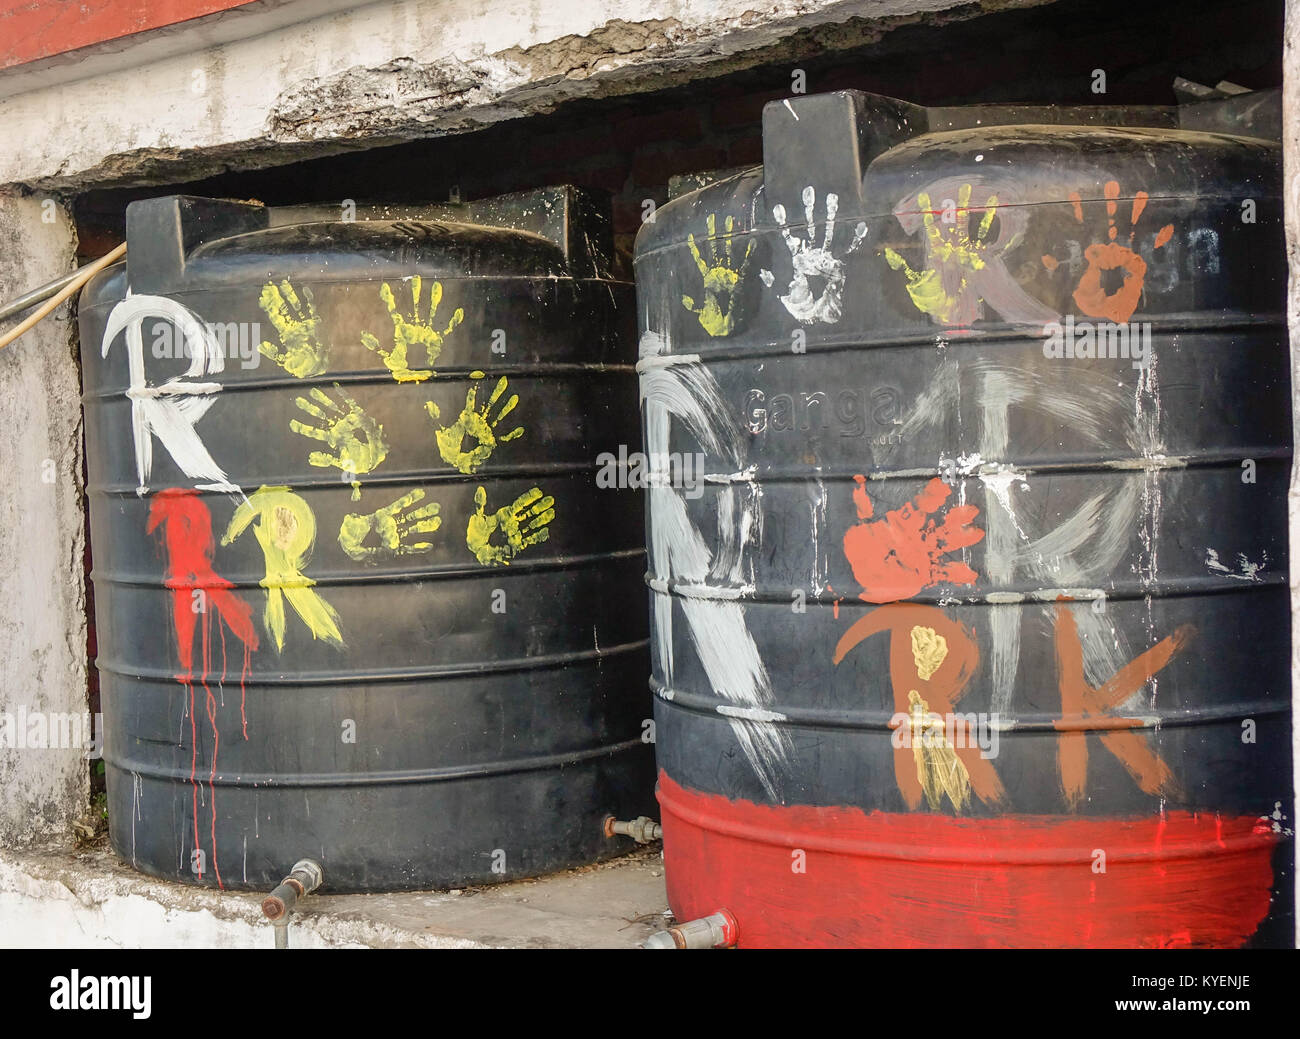 A abstract art by local kids Yellow colored hand prints on black background water tank and rough R letter written Stock Photo